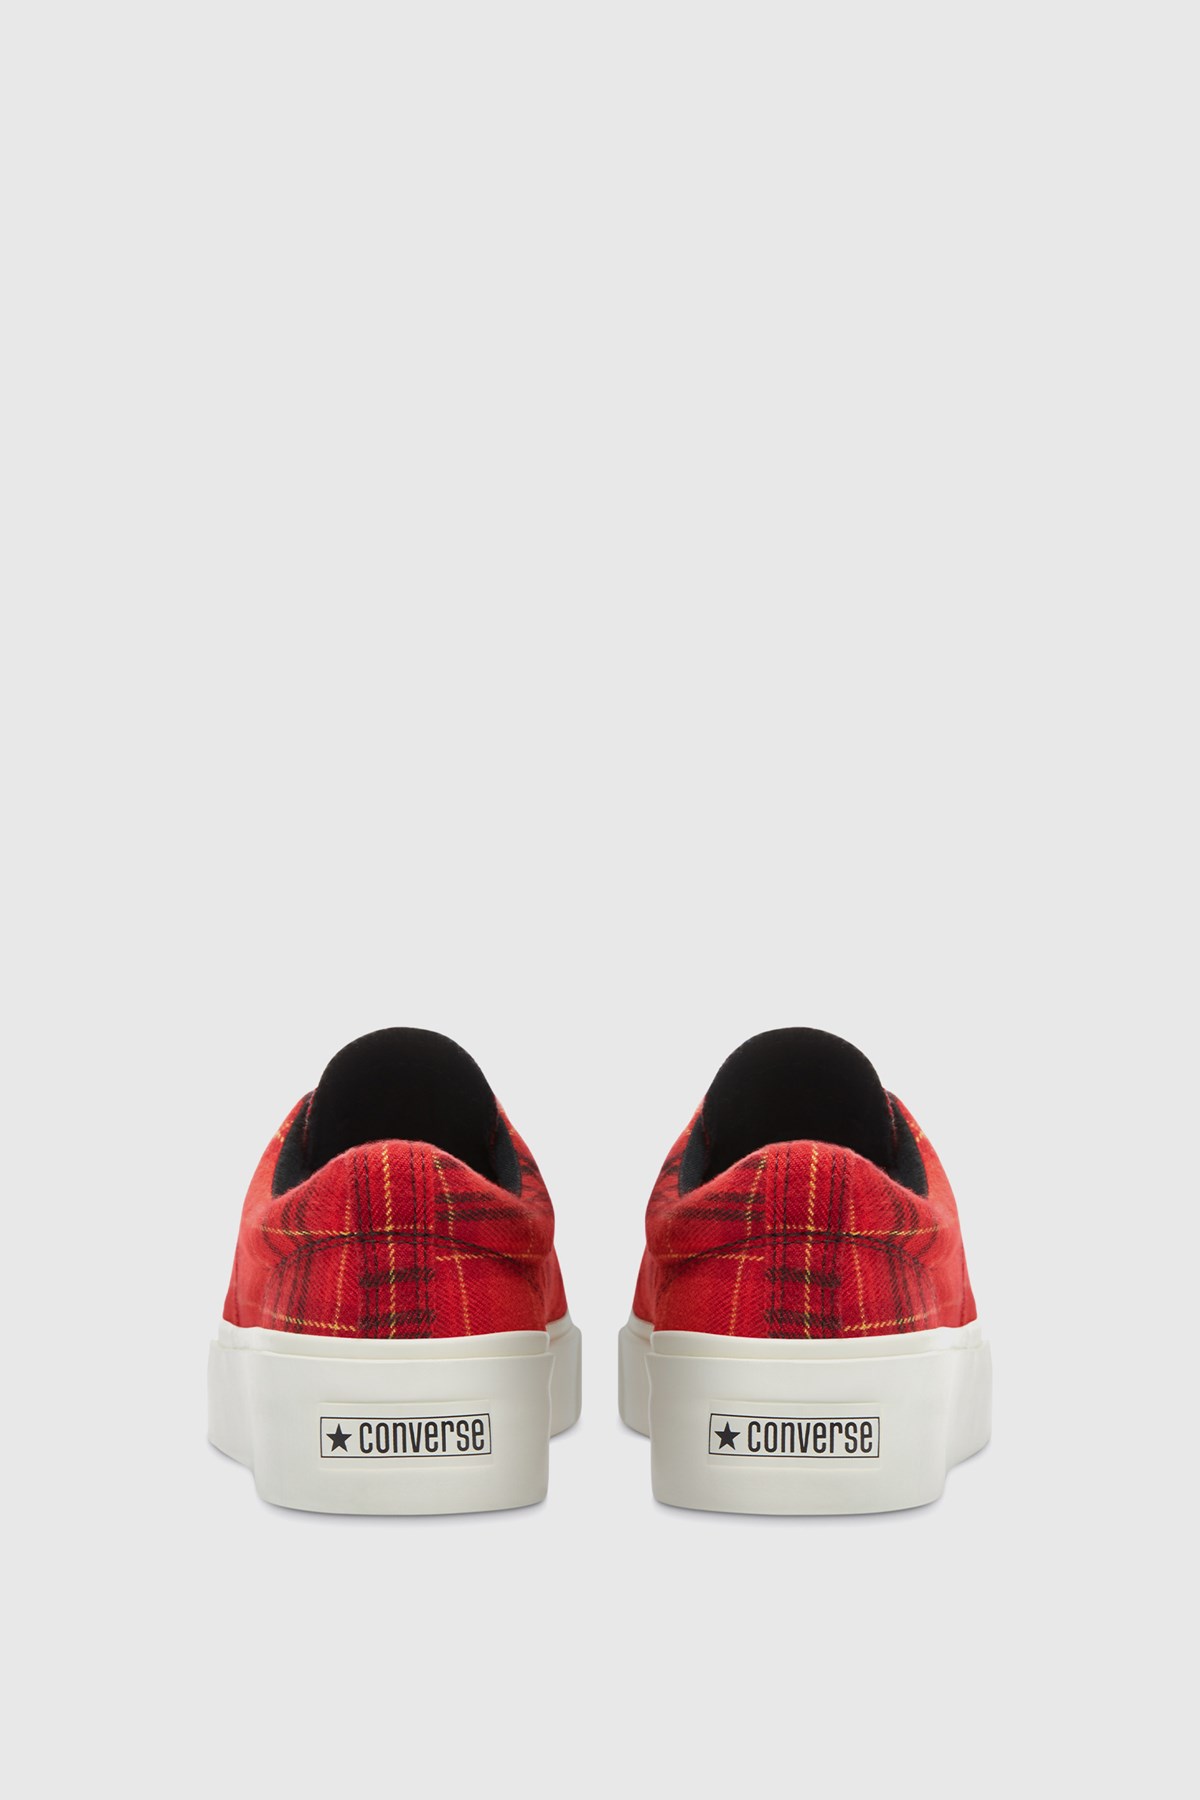 Converse Twisted Plaid Skid Grip Haute red/egret/buttercup | WoodWood.com